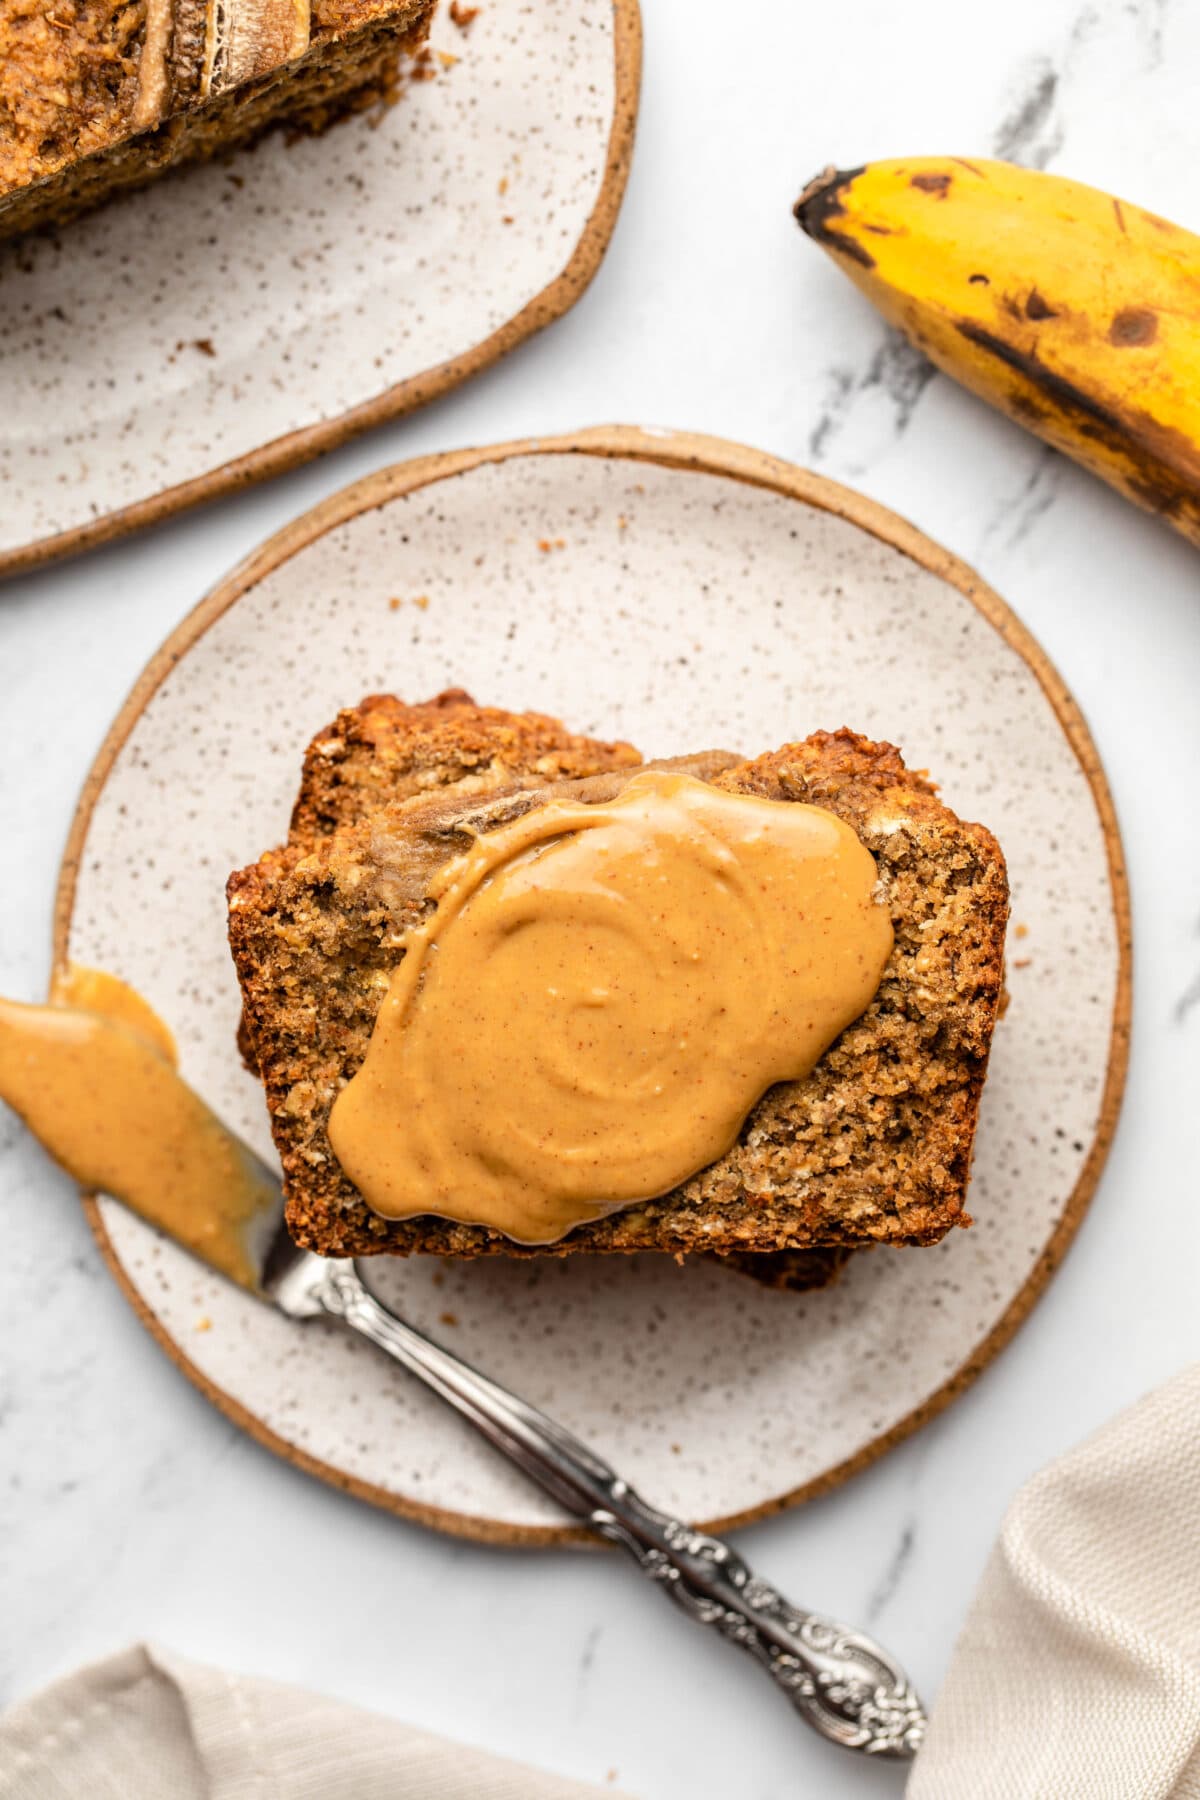 three servings of the banana bread stacked, topped with nut butter with the butter knife displayed next to the banana bread slices